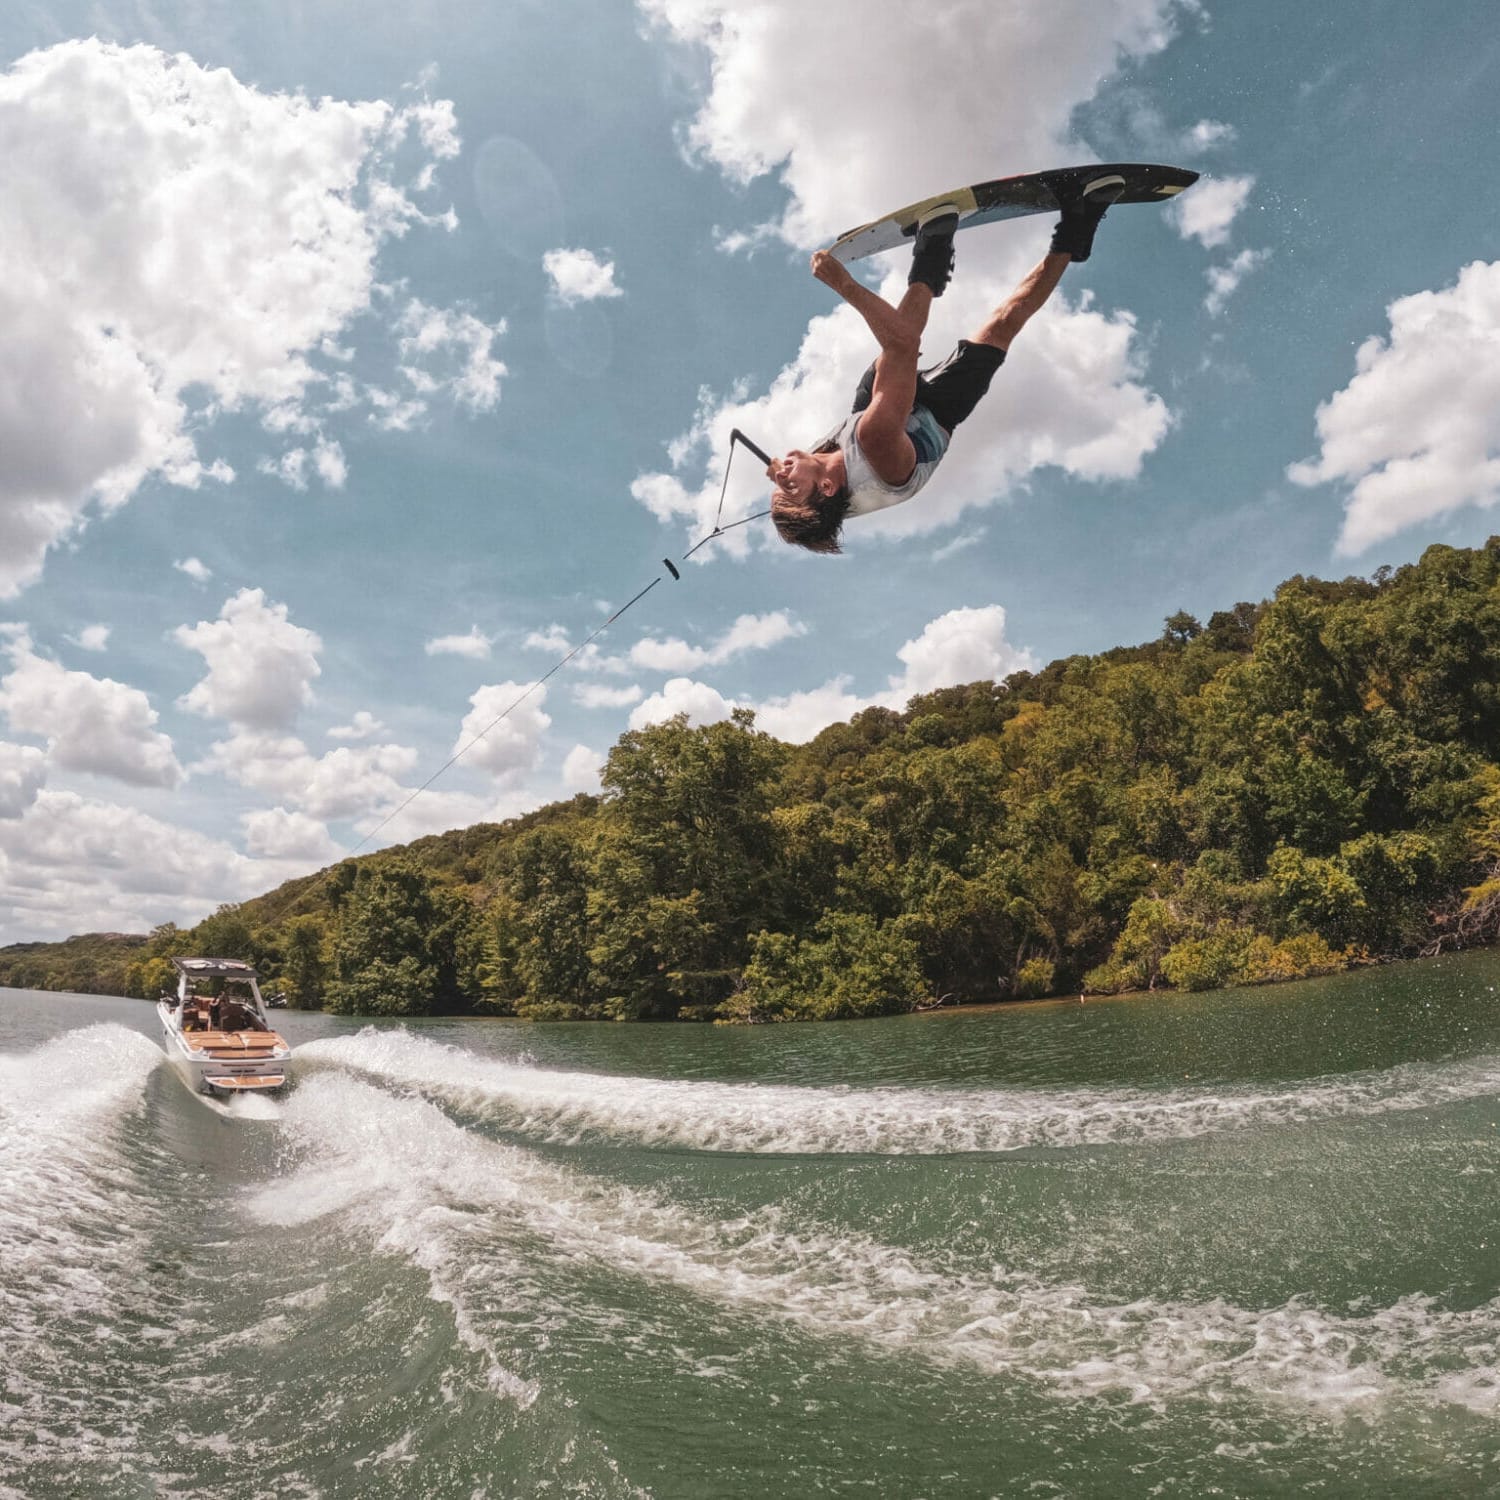 A man wakesurfing with a wakeboat in the background.